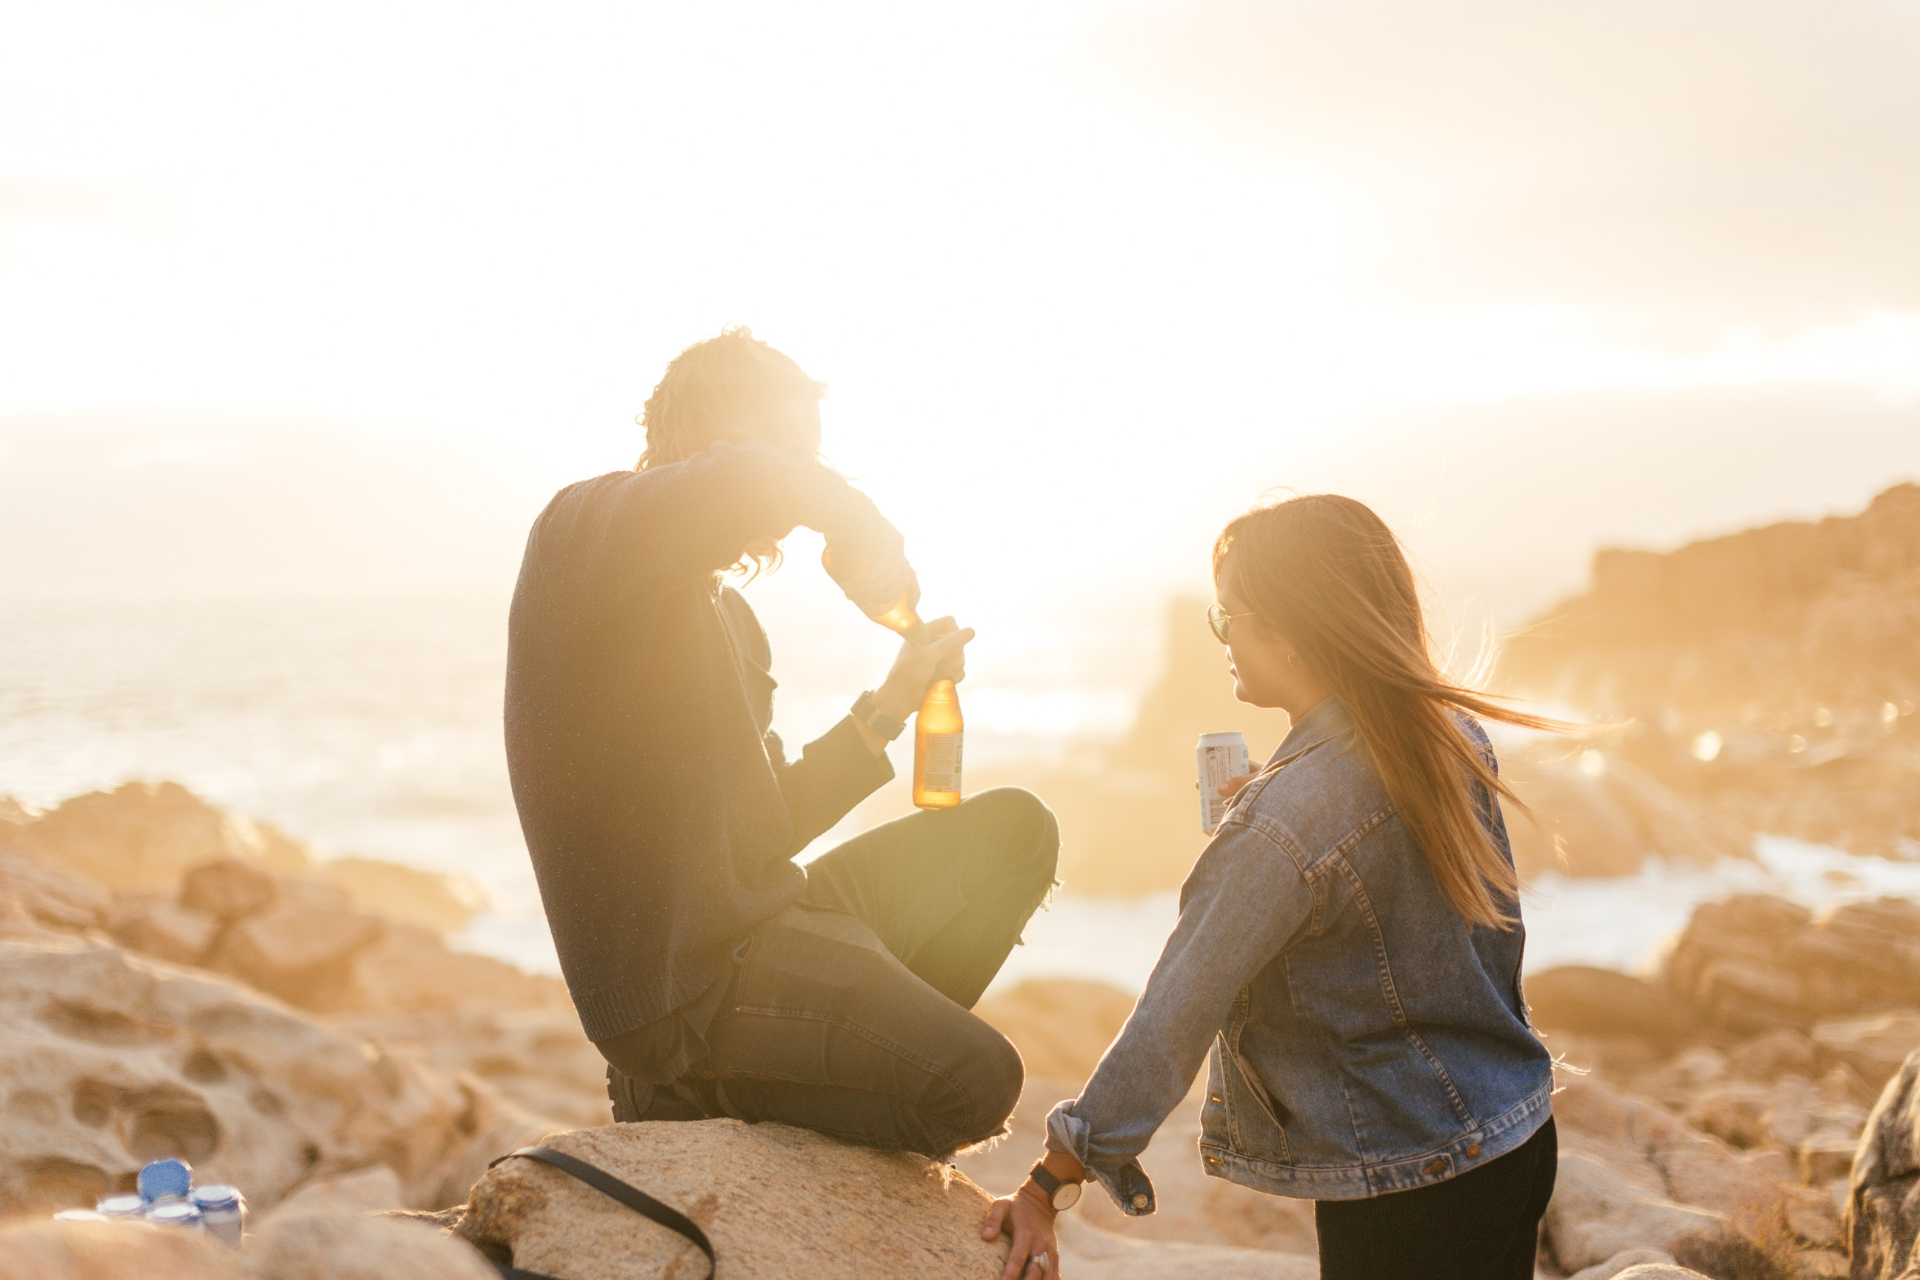 Young interracial couple sitting on the rocks by the beach watching the sunset and having a drink together. A St Petersburg, FL relationship therapist could support you and your partner to improve intimacy and communication. Our expert therapist can help you on your journey to happiness.